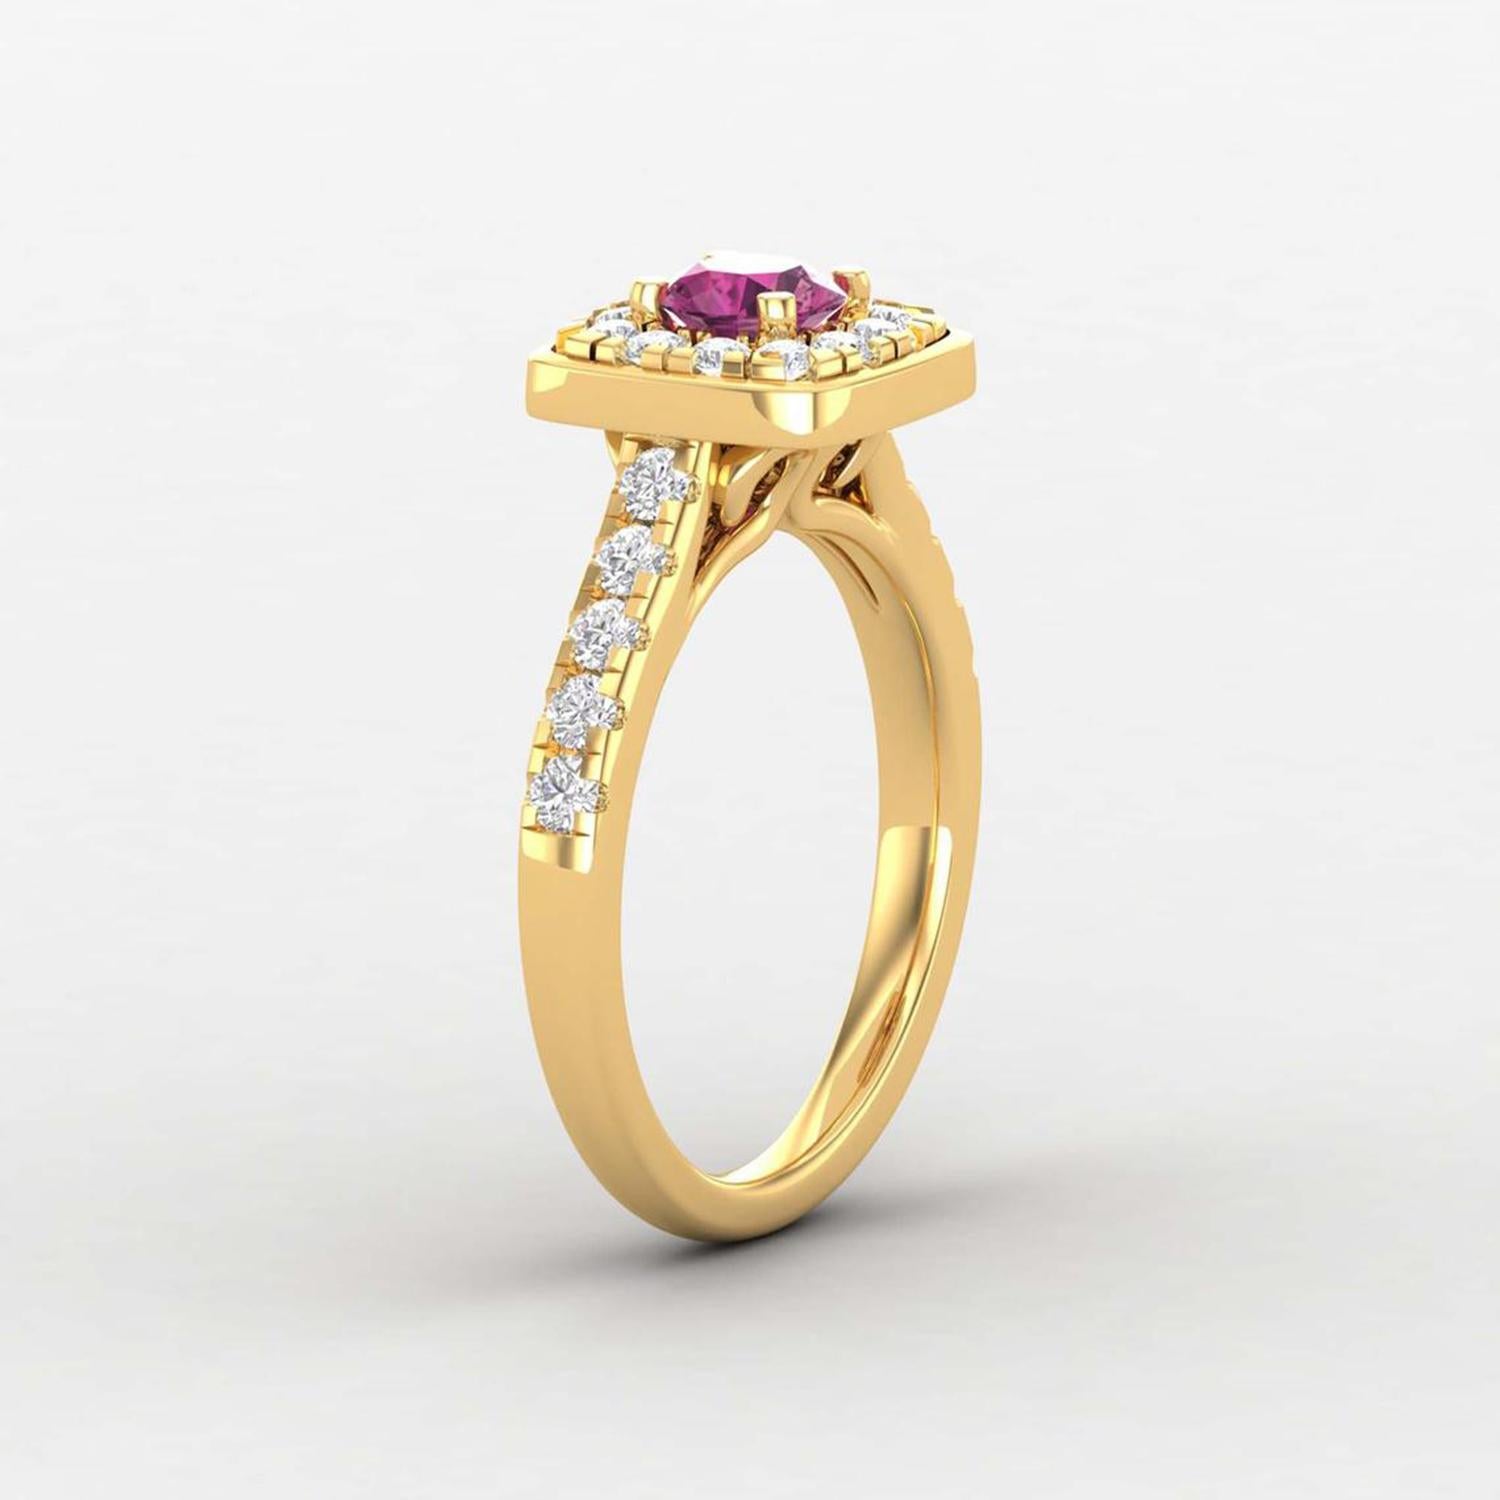 Modern 14 K Gold Rubellite Tourmaline Ring / Diamond Ring / Solitaire Ring For Sale